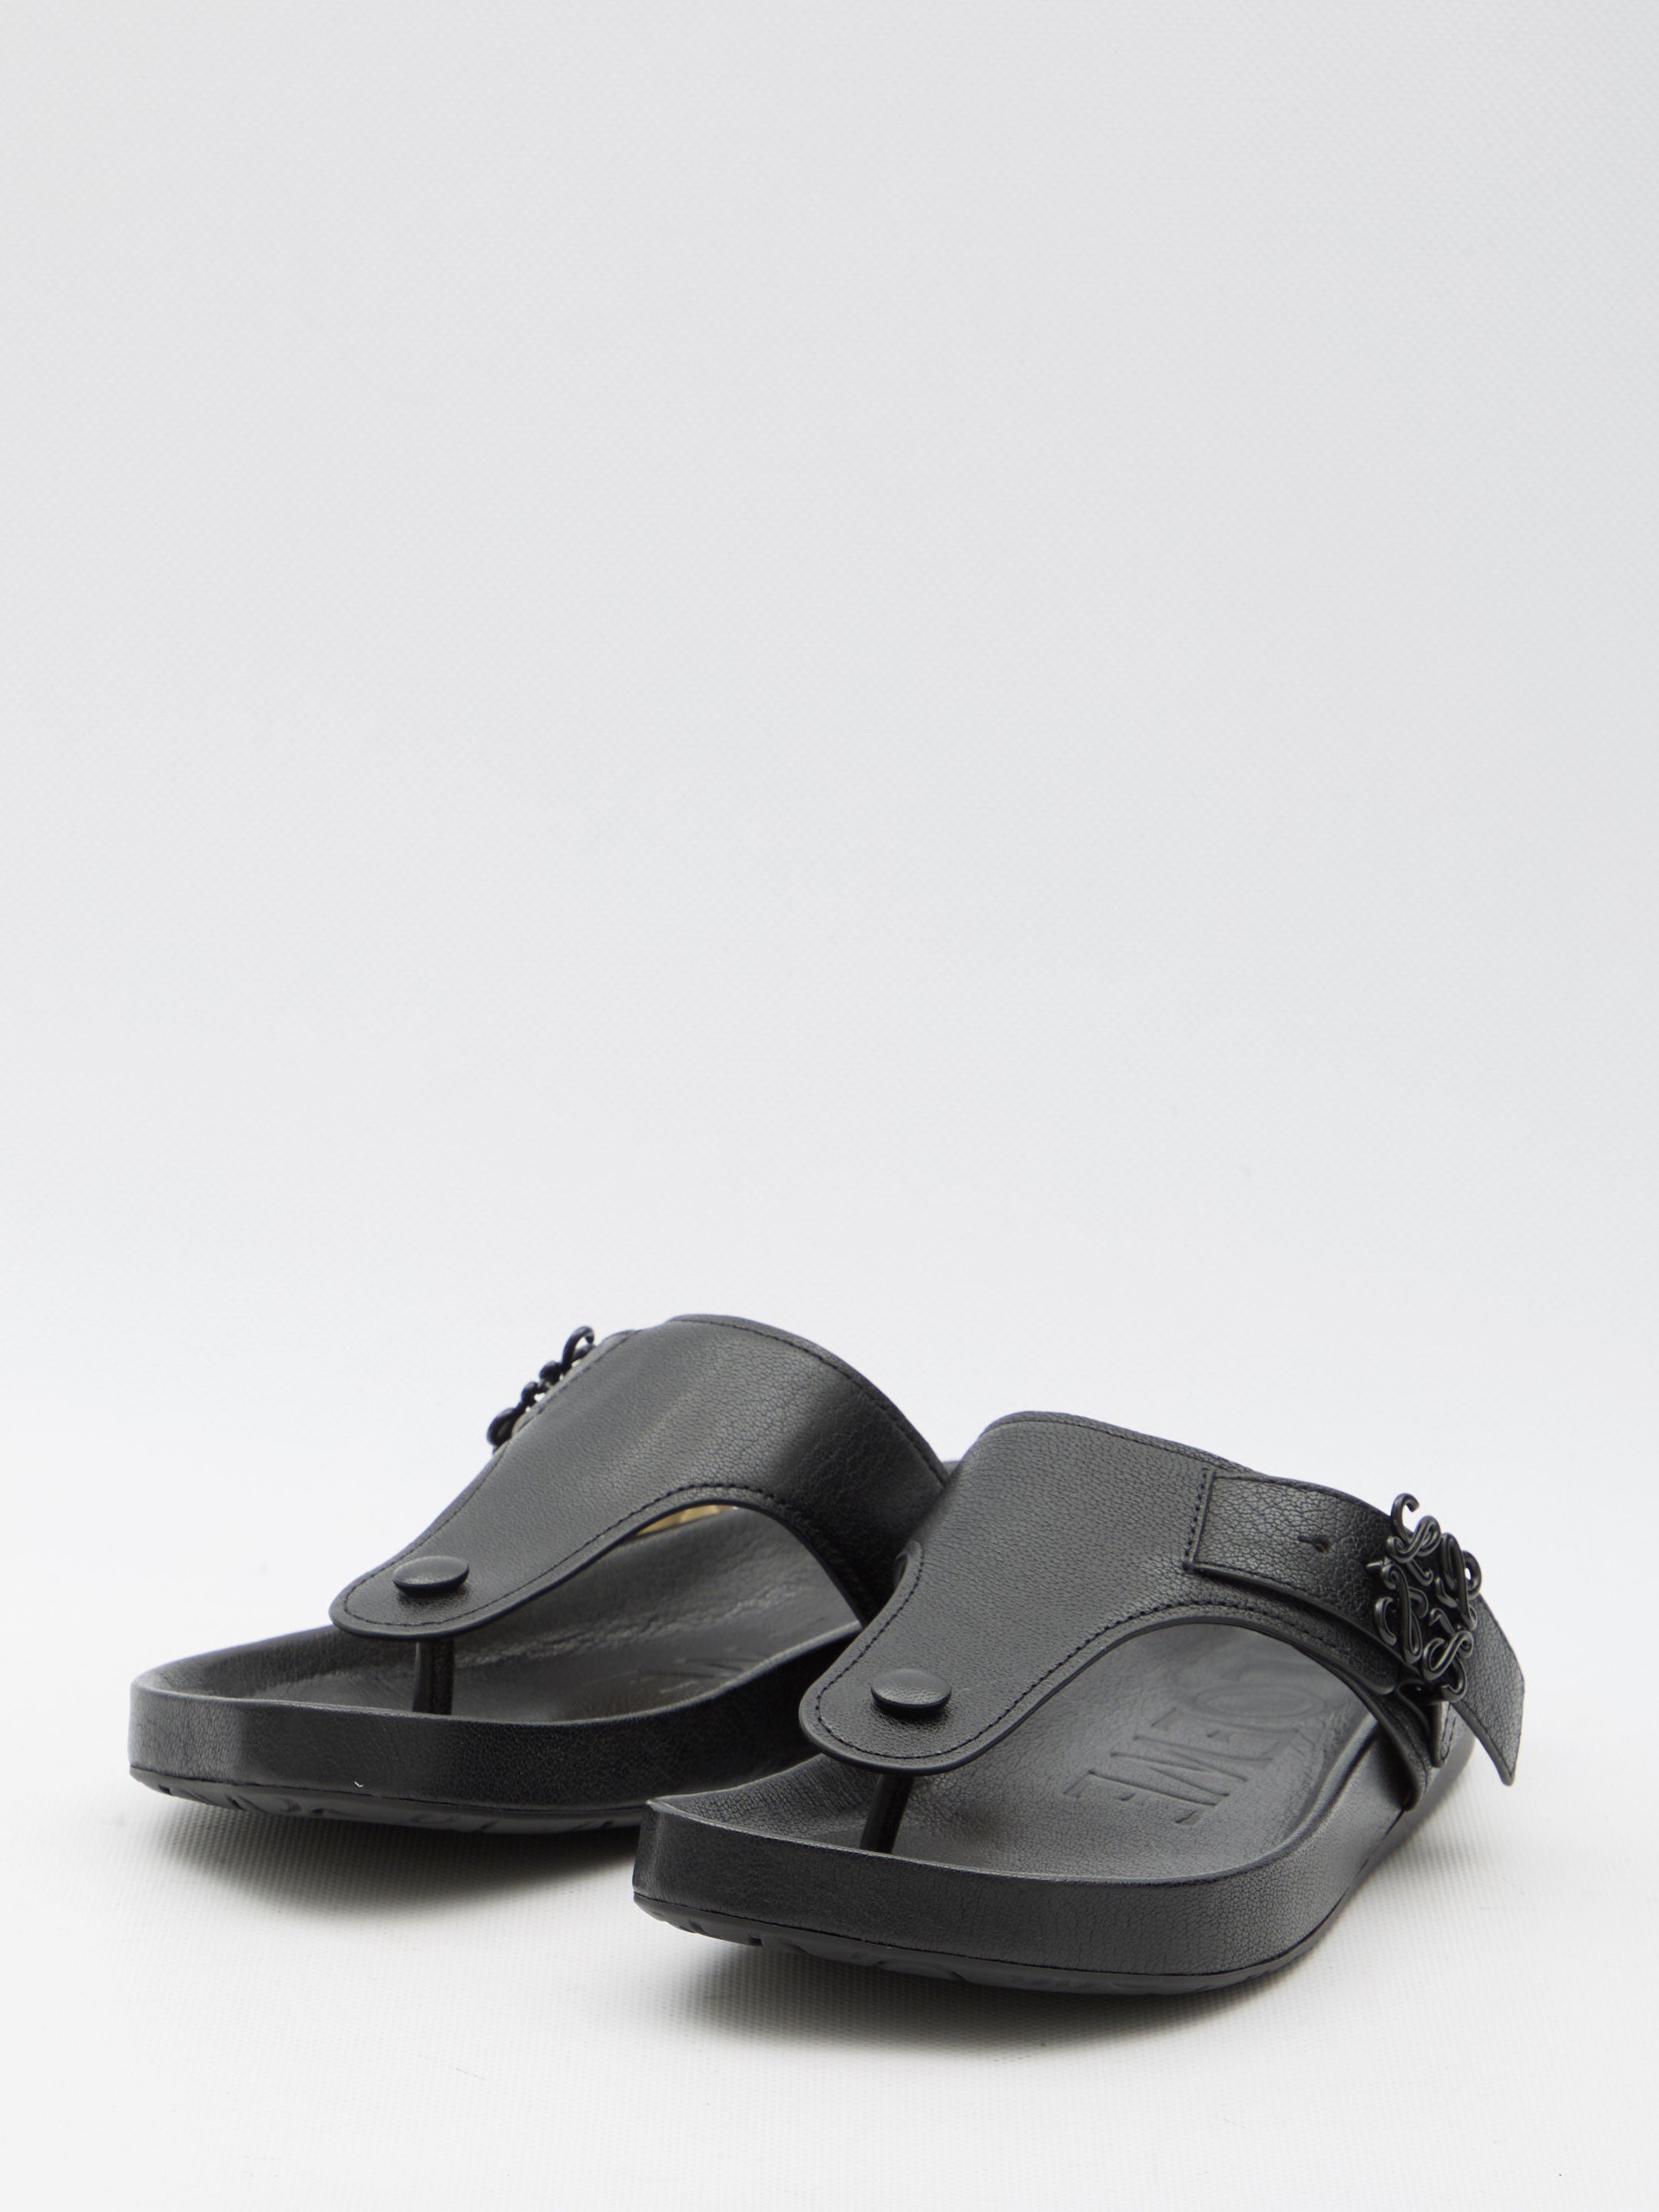 LOEWE-OUTLET-SALE-Ease-sandals-Sandalen-ARCHIVE-COLLECTION-2_aa06c9fa-573a-4031-87ad-fd002afb03e9.jpg